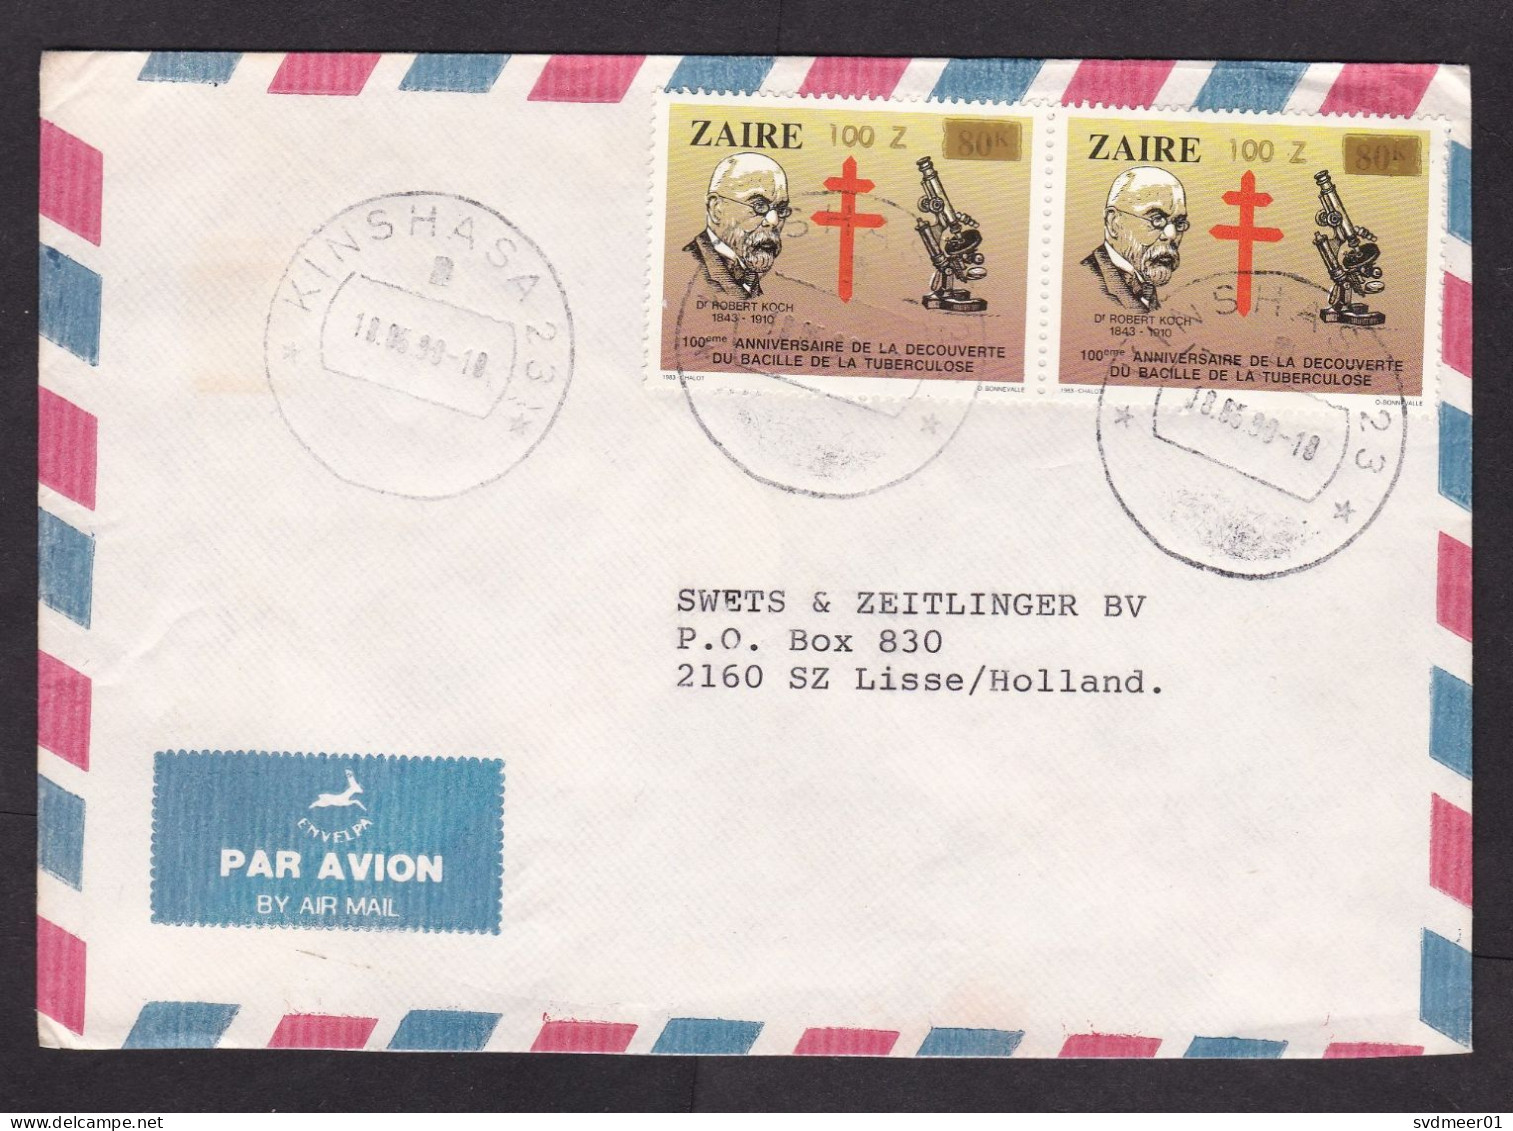 Zaire: Airmail Cover To Netherlands, 1990, 2 Stamps, Koch, TB, Microscope, Value Overprint, Inflation (traces Of Use) - Covers & Documents